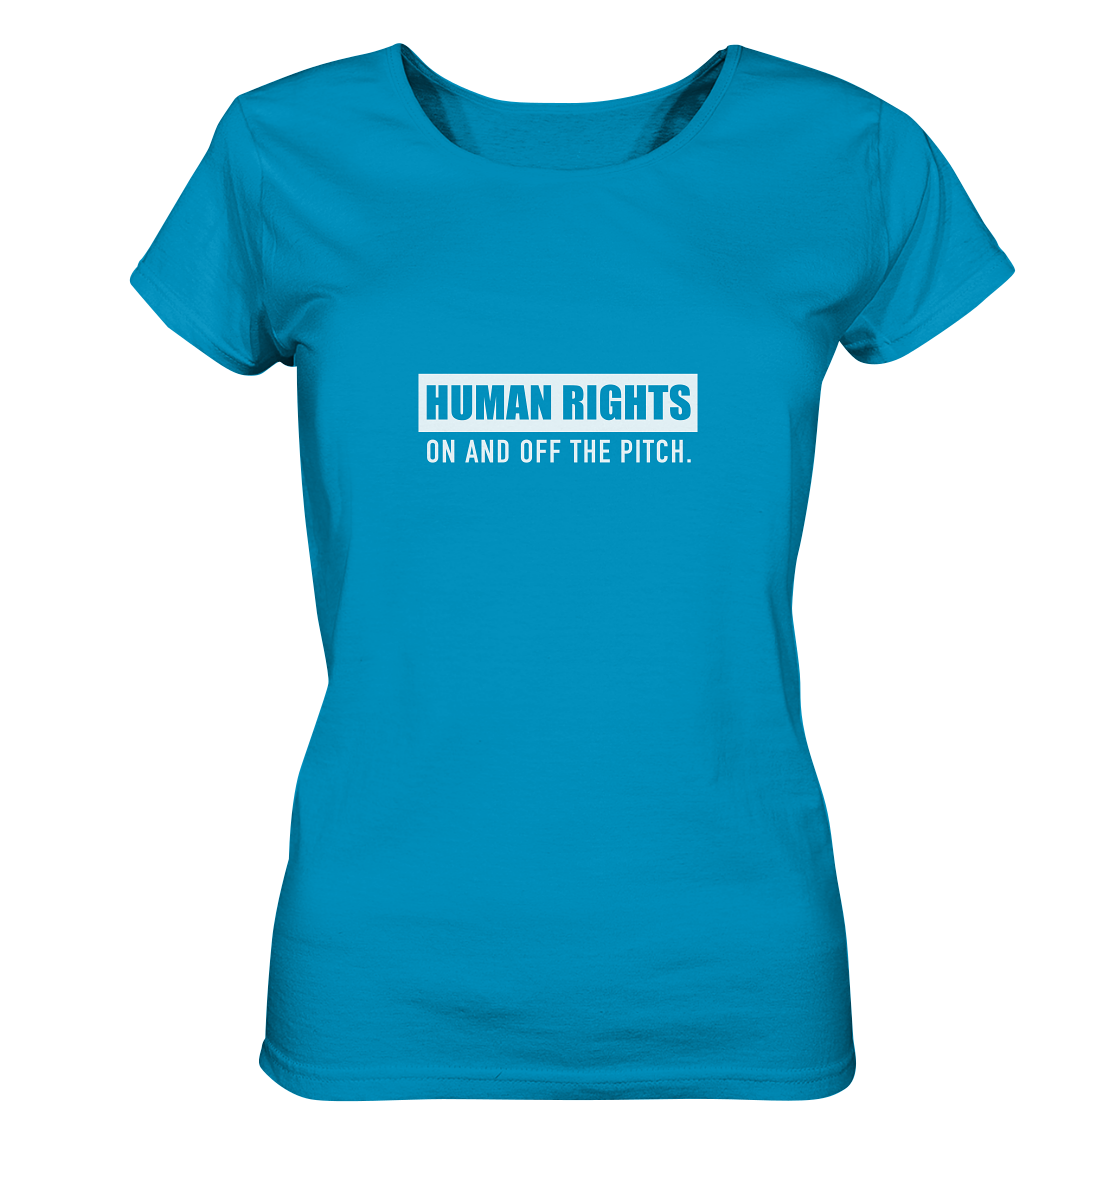 N.O.S.W. BLOCK Fanblock Shirt "HUMAN RIGHTS ON AND OFF THE PITCH" Girls Organic T-Shirt azur